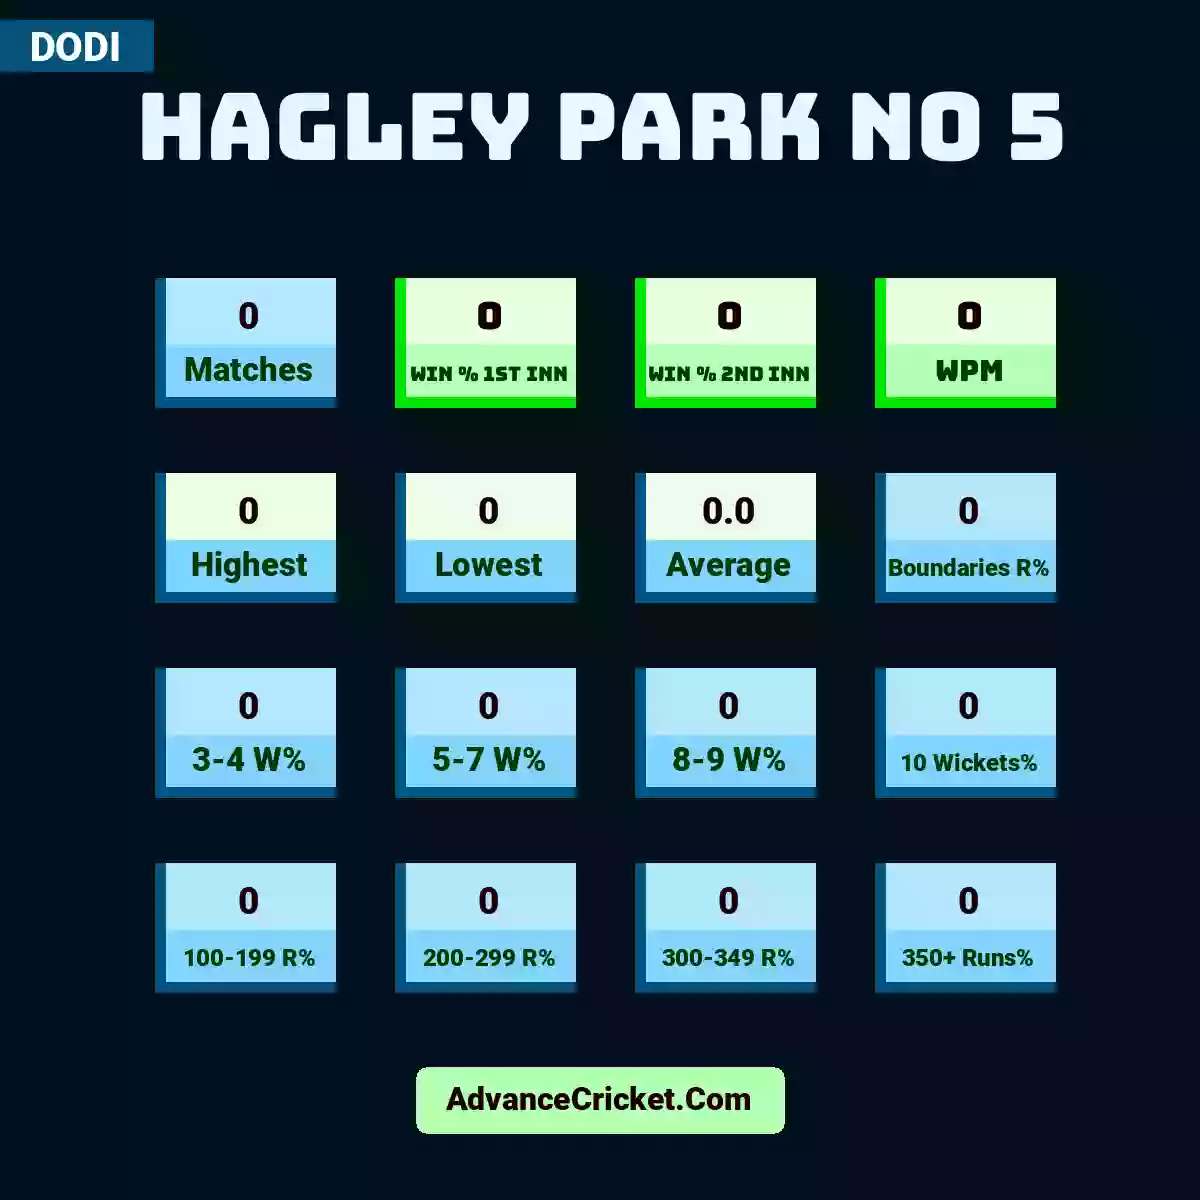 Image showing Hagley Park No 5 with Matches: 0, Win % 1st Inn: 0, Win % 2nd Inn: 0, WPM: 0, Highest: 0, Lowest: 0, Average: 0.0, Boundaries R%: 0, 3-4 W%: 0, 5-7 W%: 0, 8-9 W%: 0, 10 Wickets%: 0, 100-199 R%: 0, 200-299 R%: 0, 300-349 R%: 0, 350+ Runs%: 0.